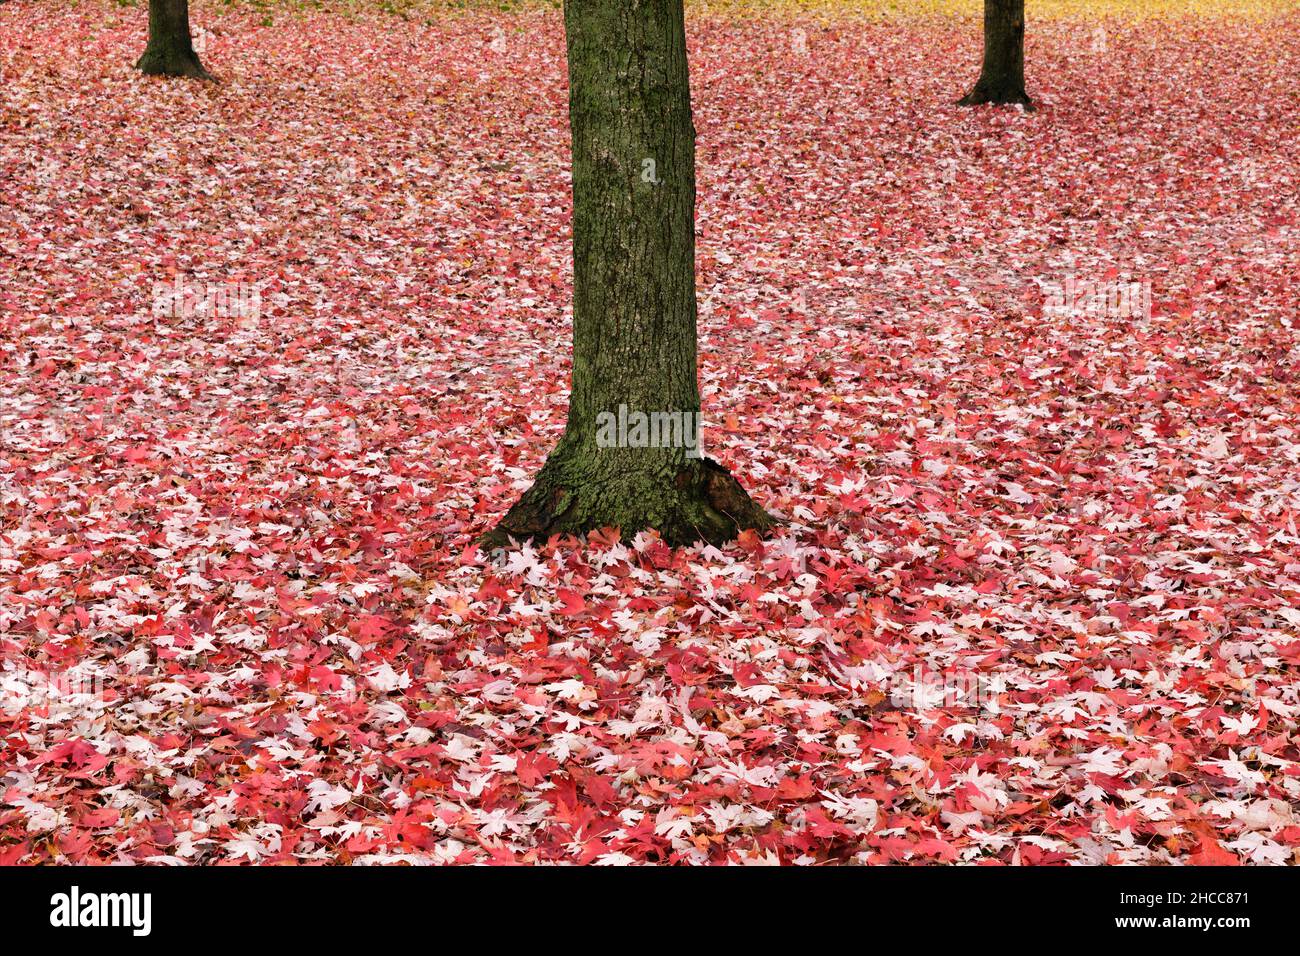 red maple leaves covering the ground and tree trunks Stock Photo